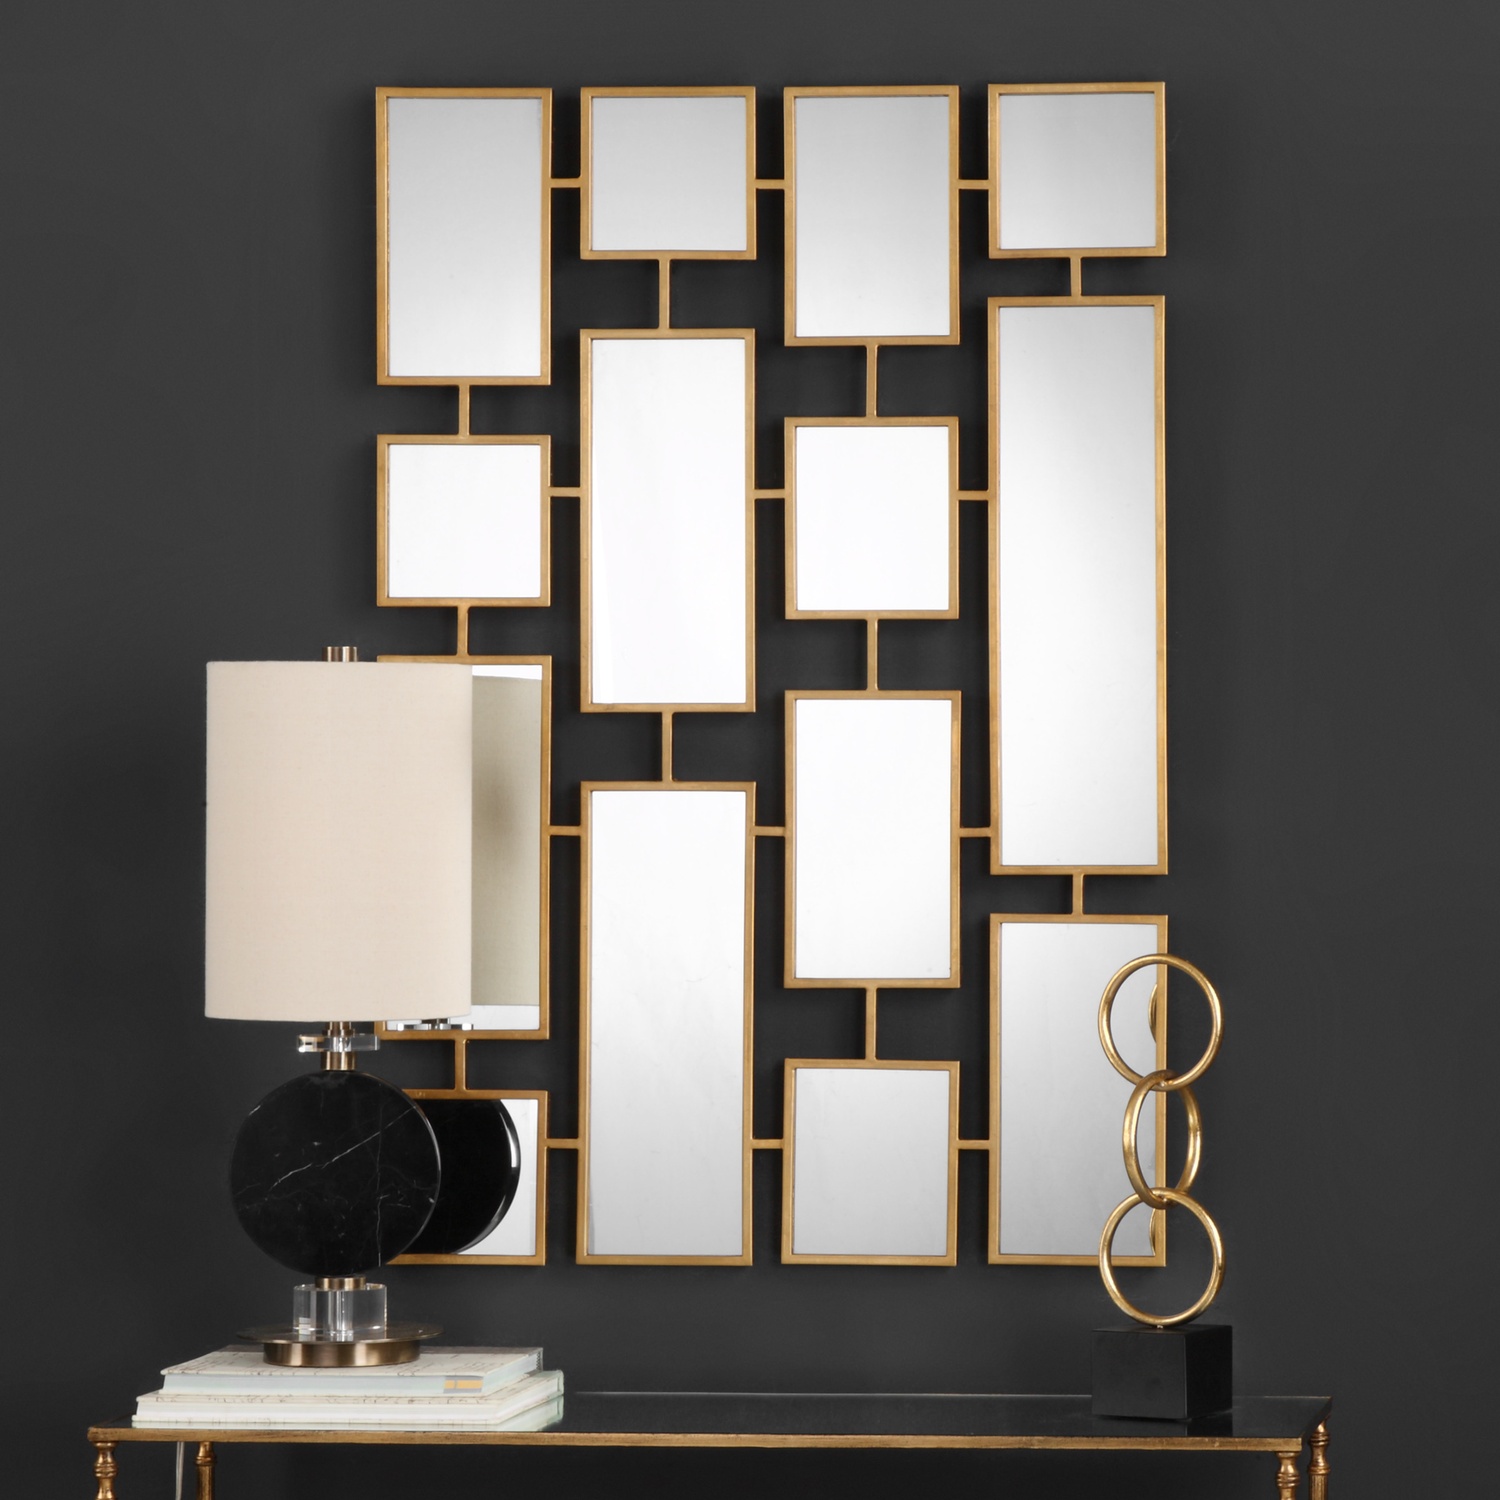 Kennon-Forged Gold Rectangles Mirror